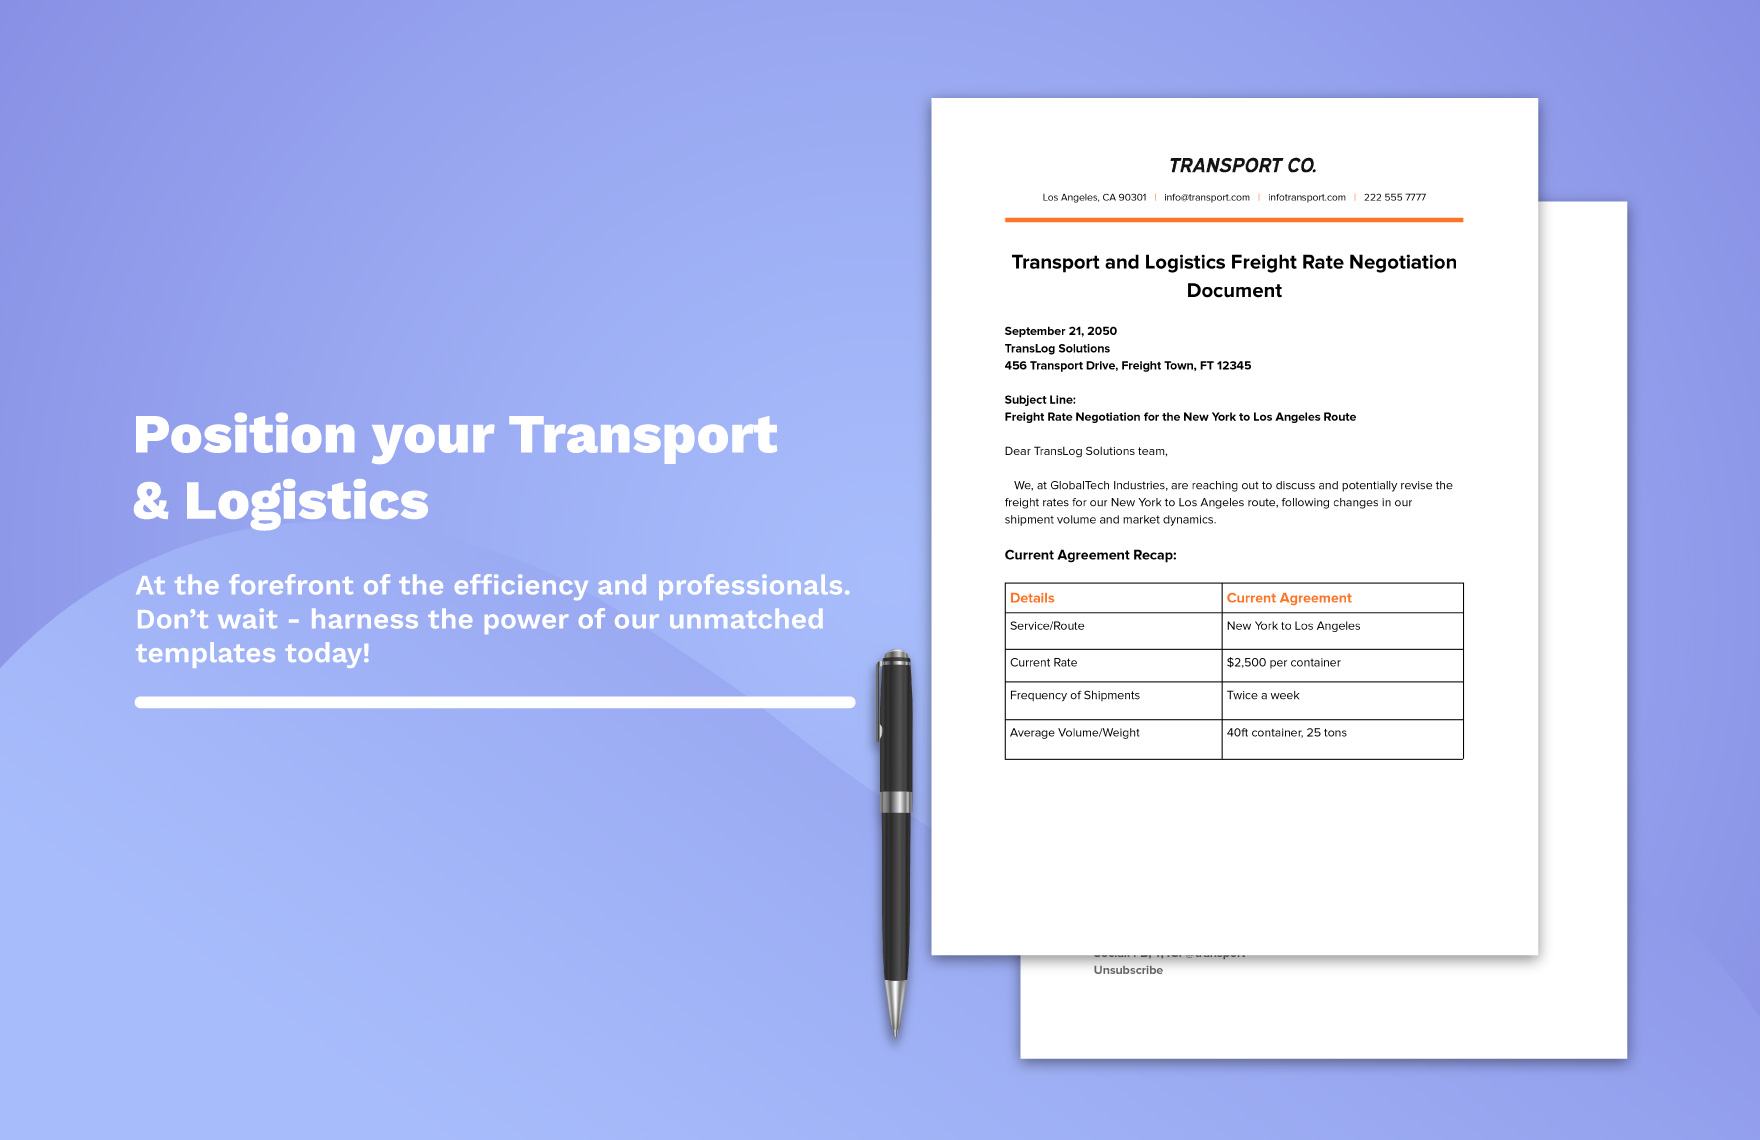 Transport and Logistics Freight Rate Negotiation Document Template